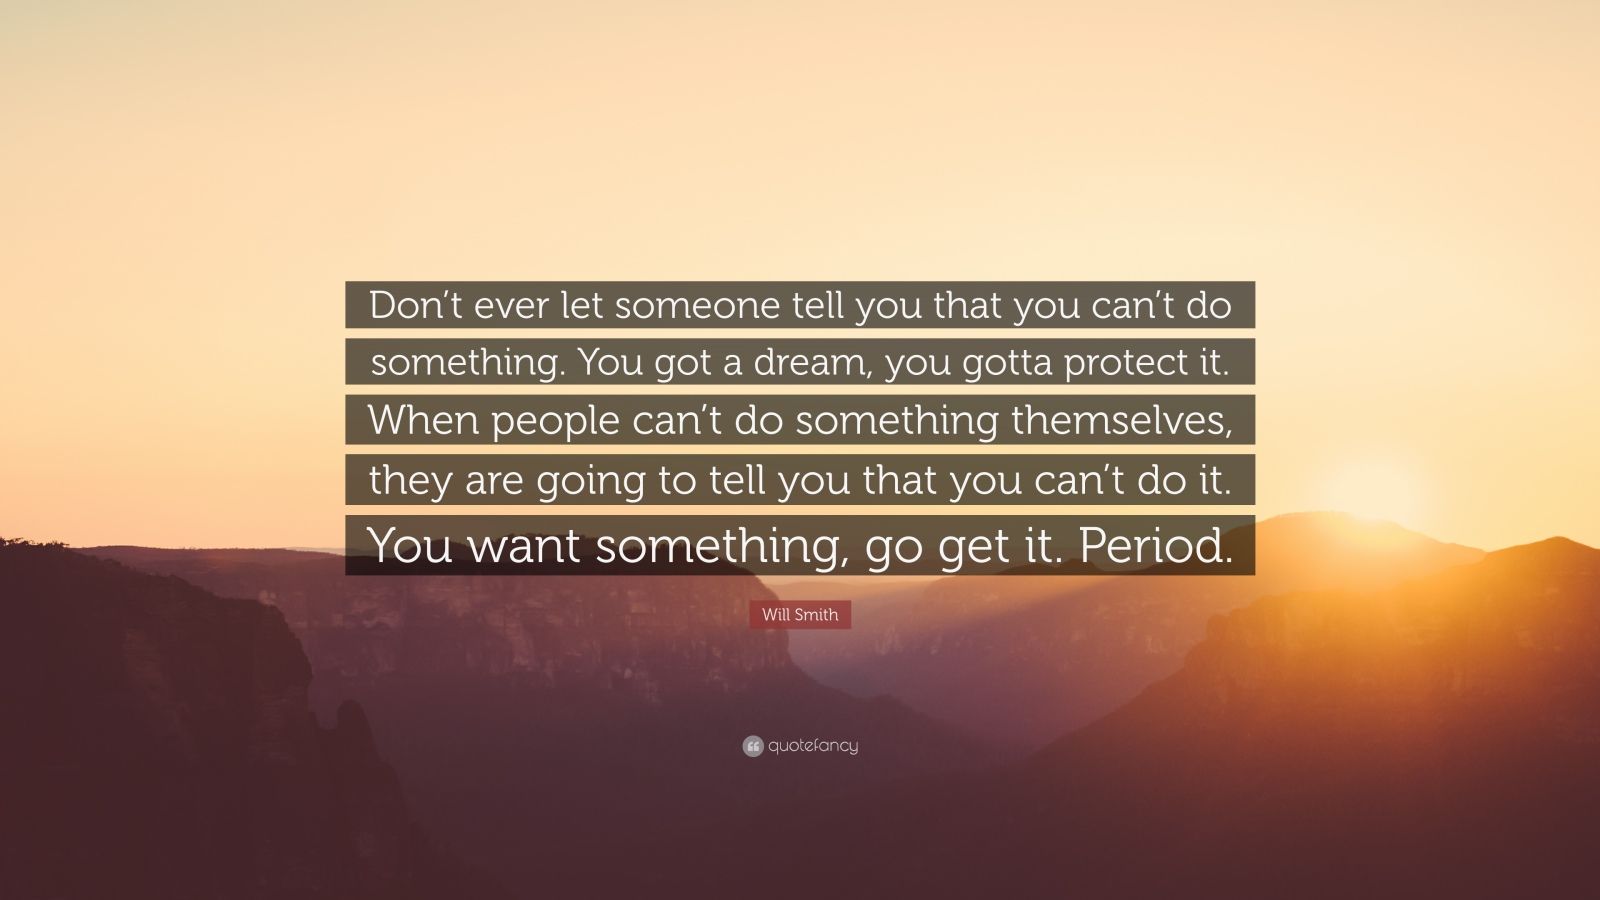 Will Smith Quote: “Don’t ever let someone tell you that you can’t do